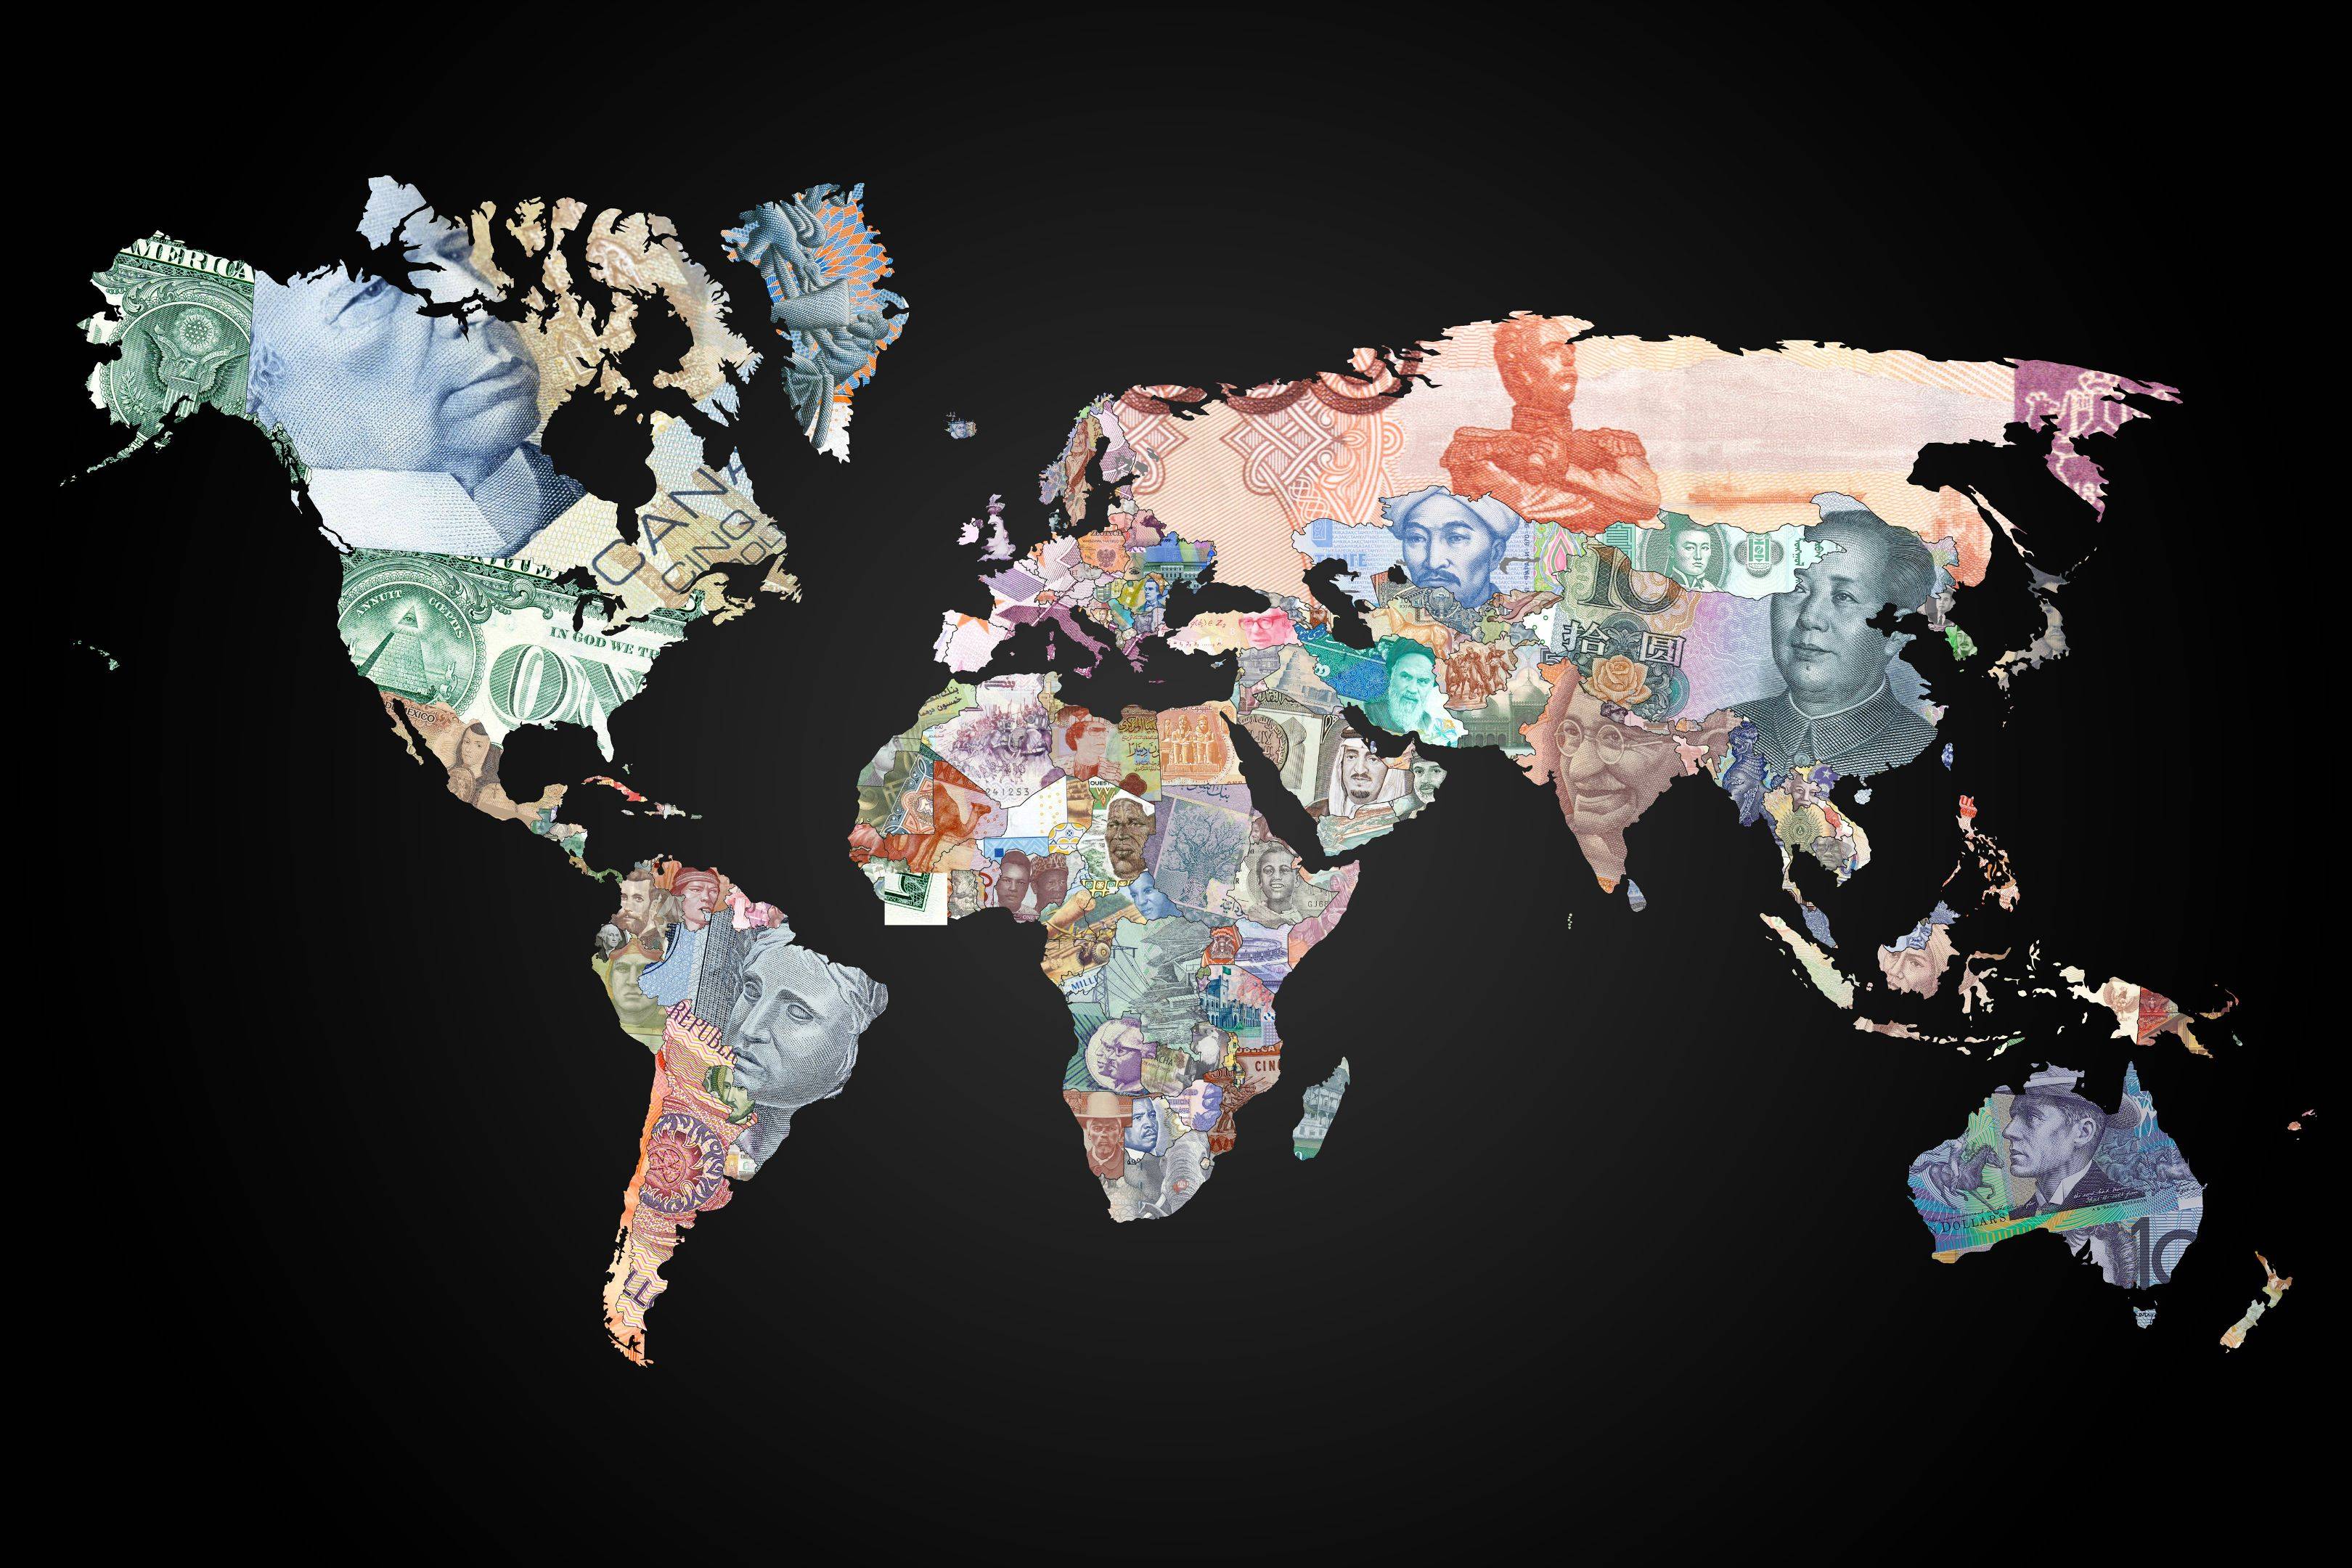 ] World Atlas Representing Countries With Their Currencies [Desktop